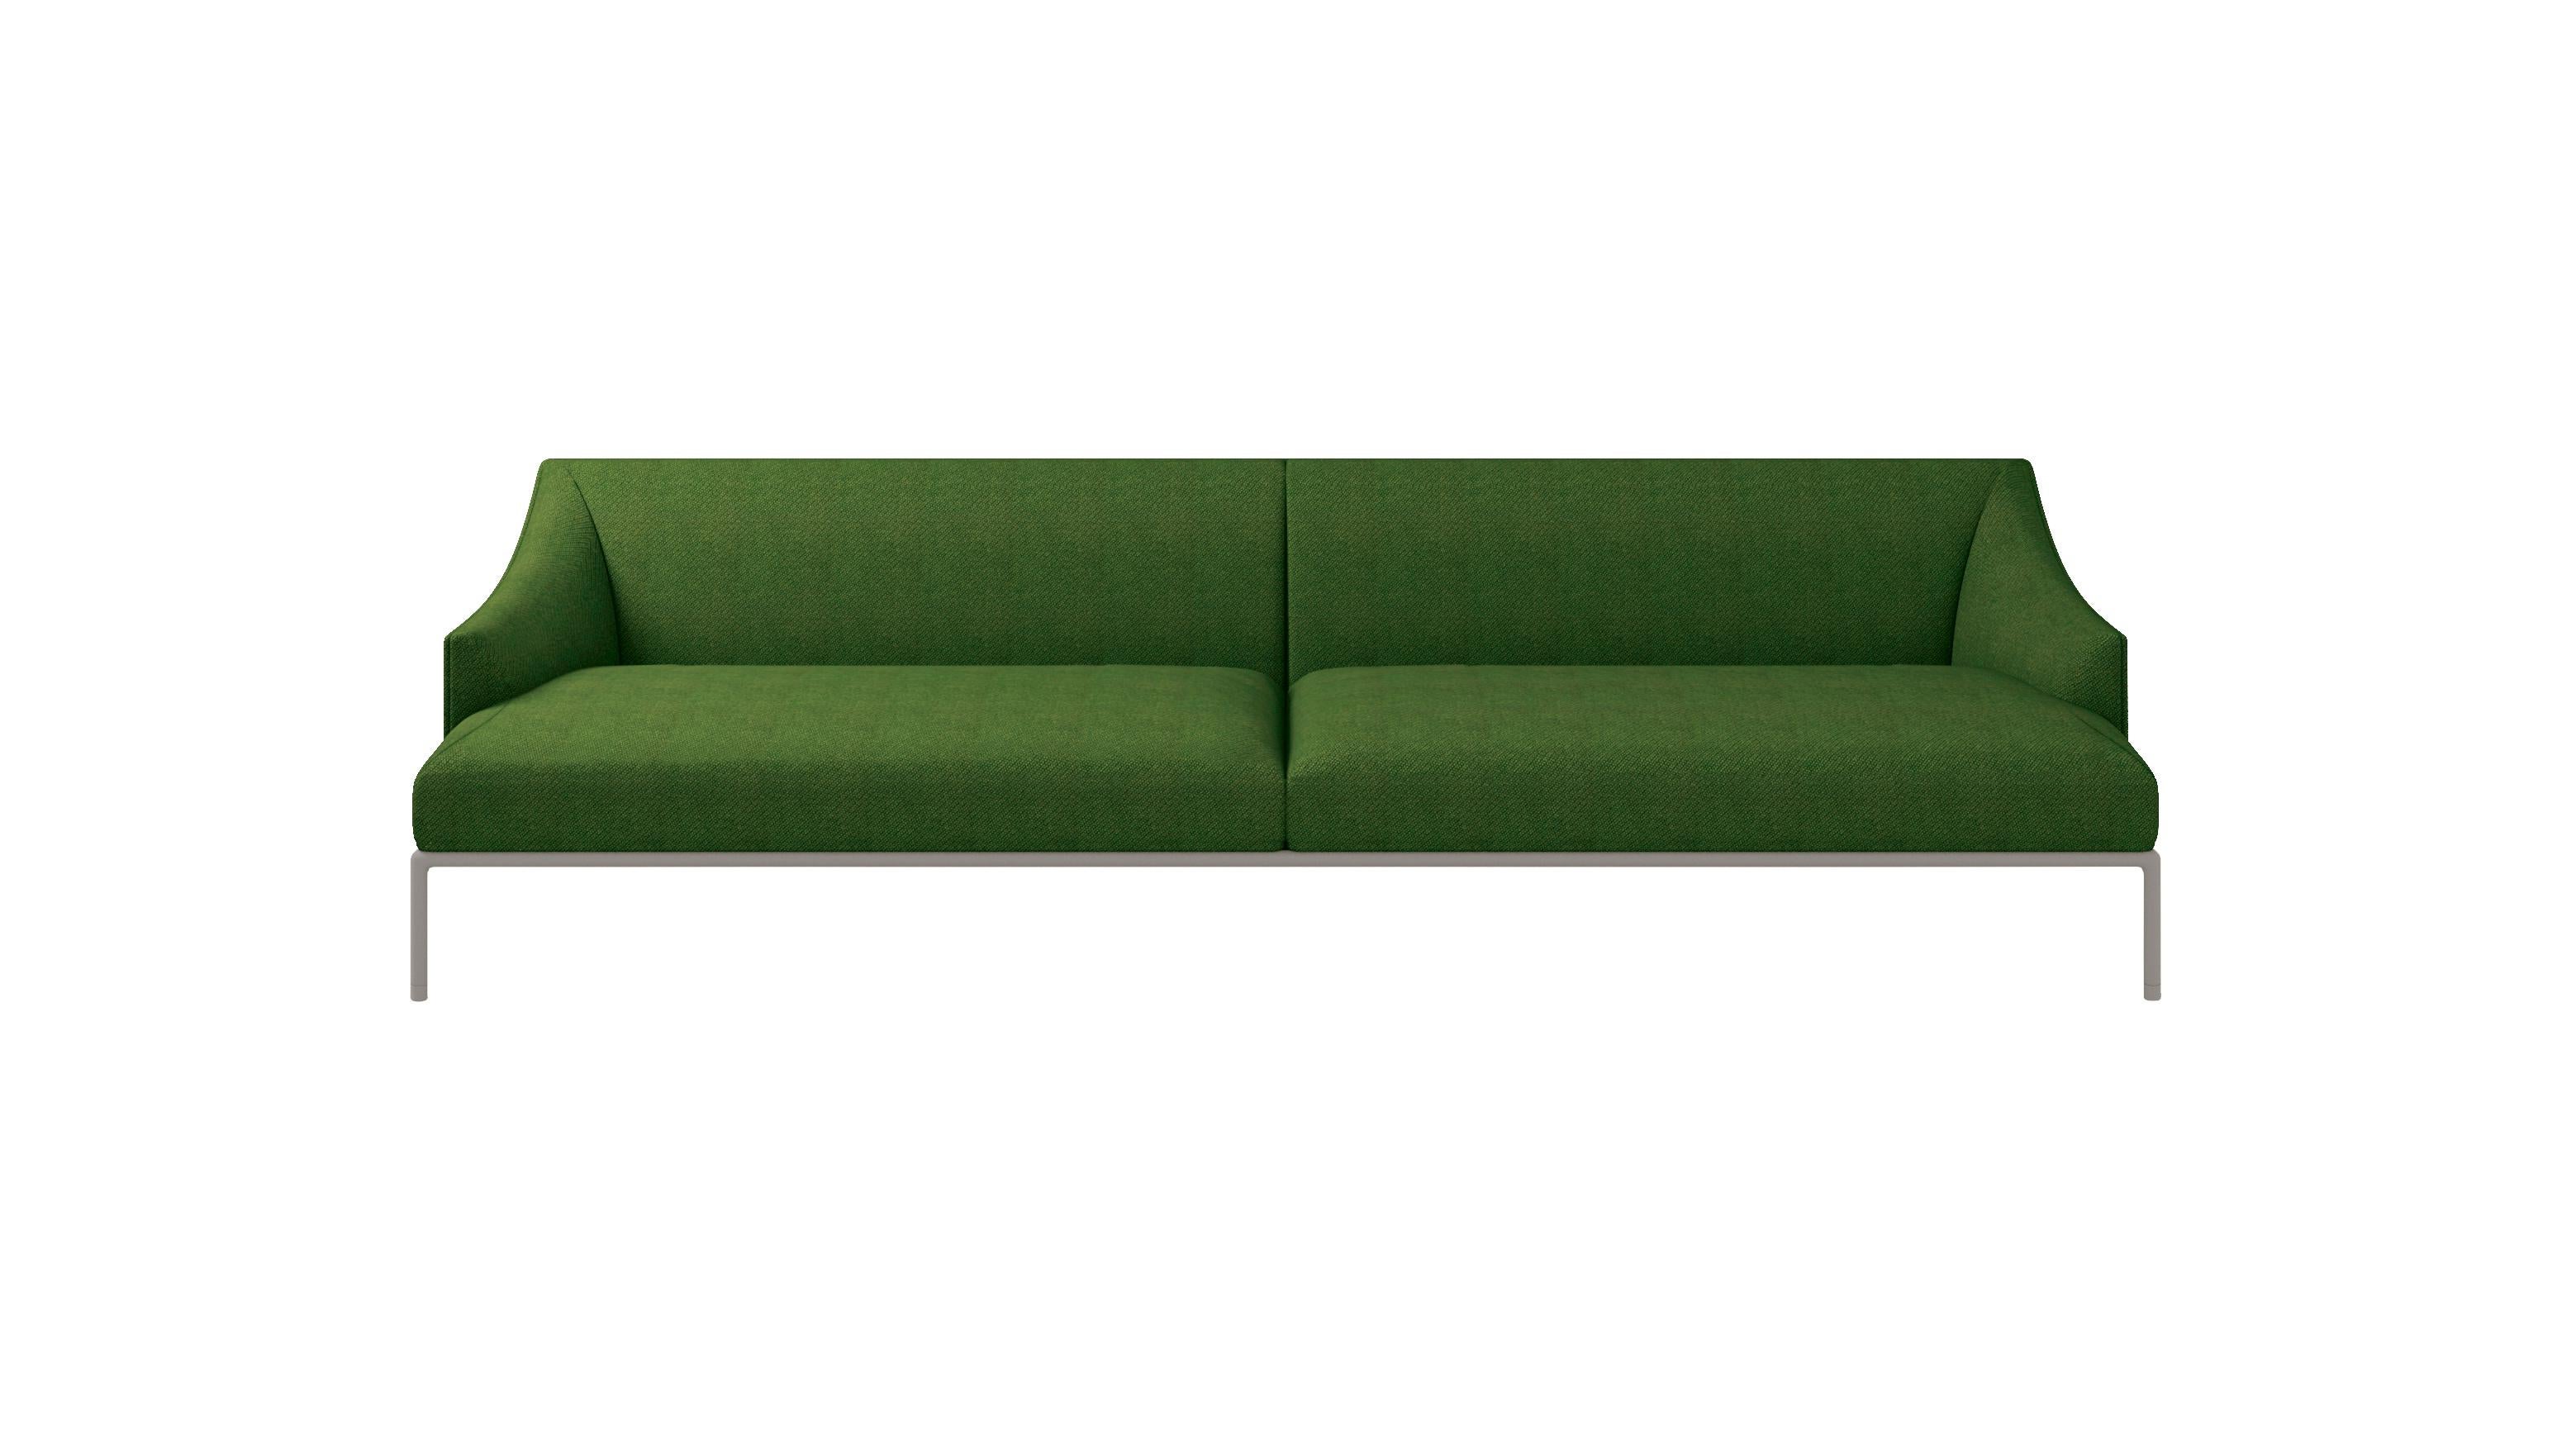 For Sale: Green (Hallingdal 2 960) Cappellini High Time Three-Seat Sofa in Fabric or Leather by Christophe Pillet